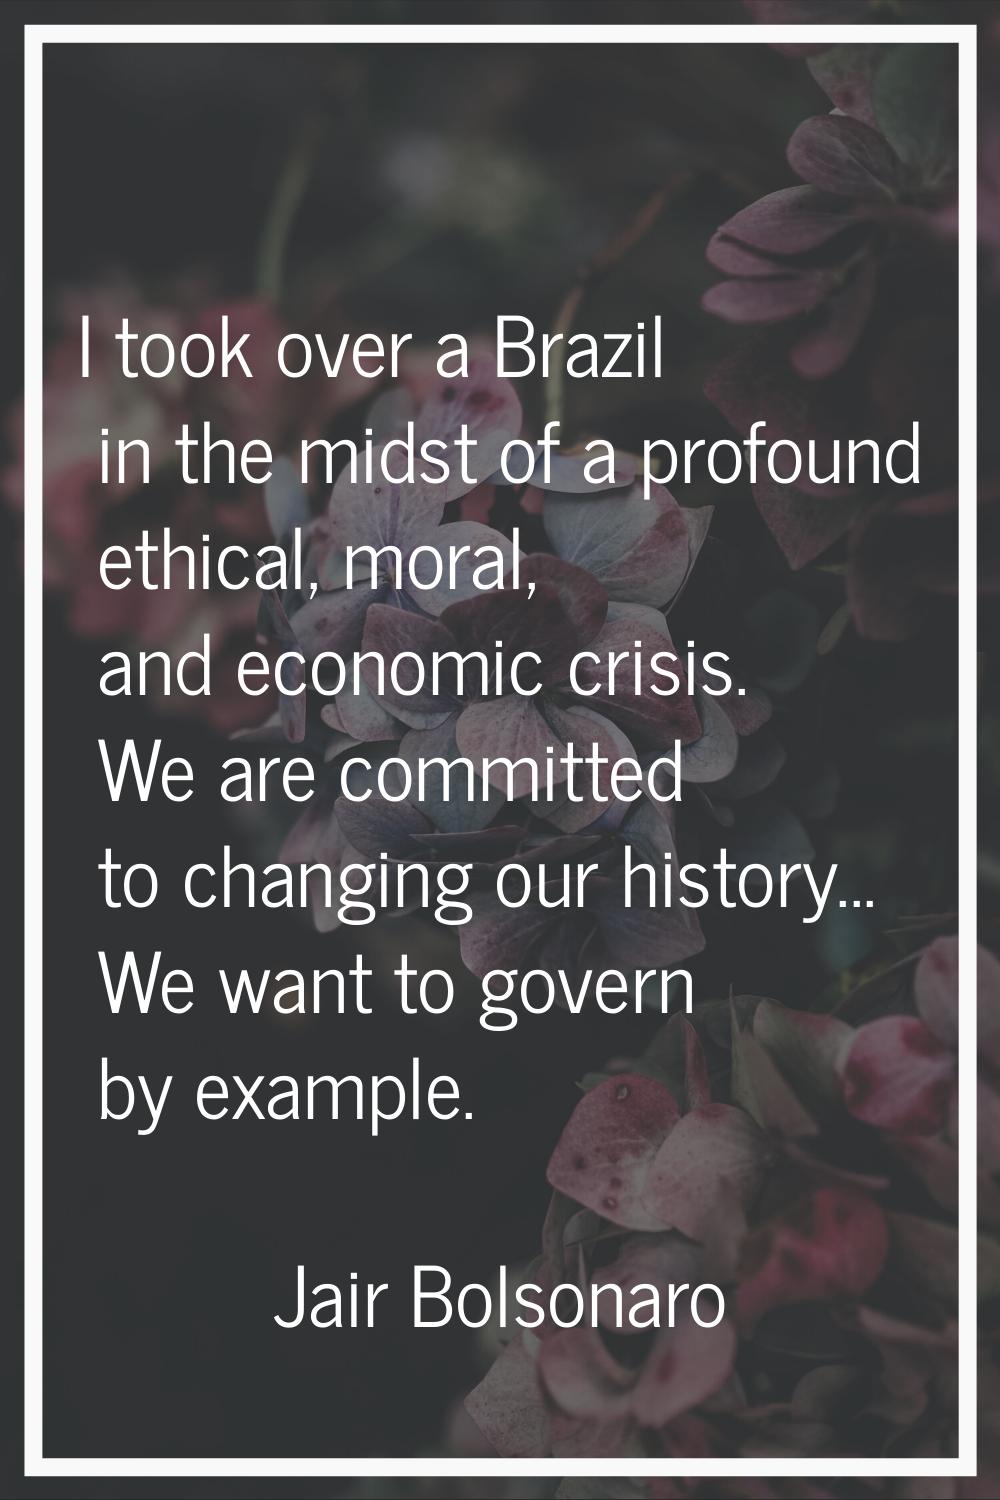 I took over a Brazil in the midst of a profound ethical, moral, and economic crisis. We are committ